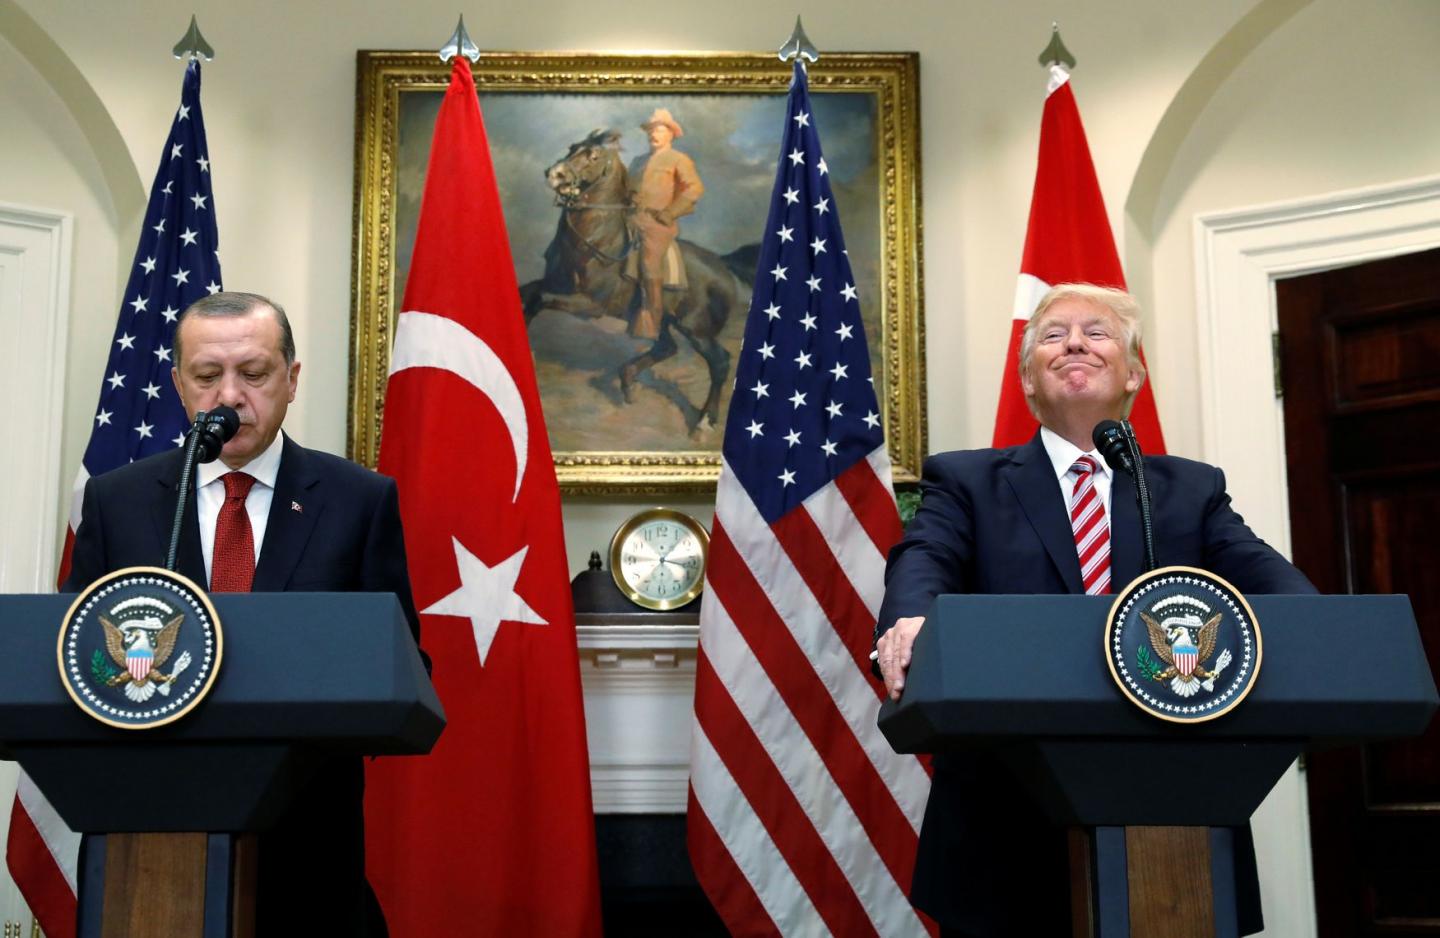 U.S. to sell Patriots to Turkey only if Ankara assures it will drop S-400 purchase